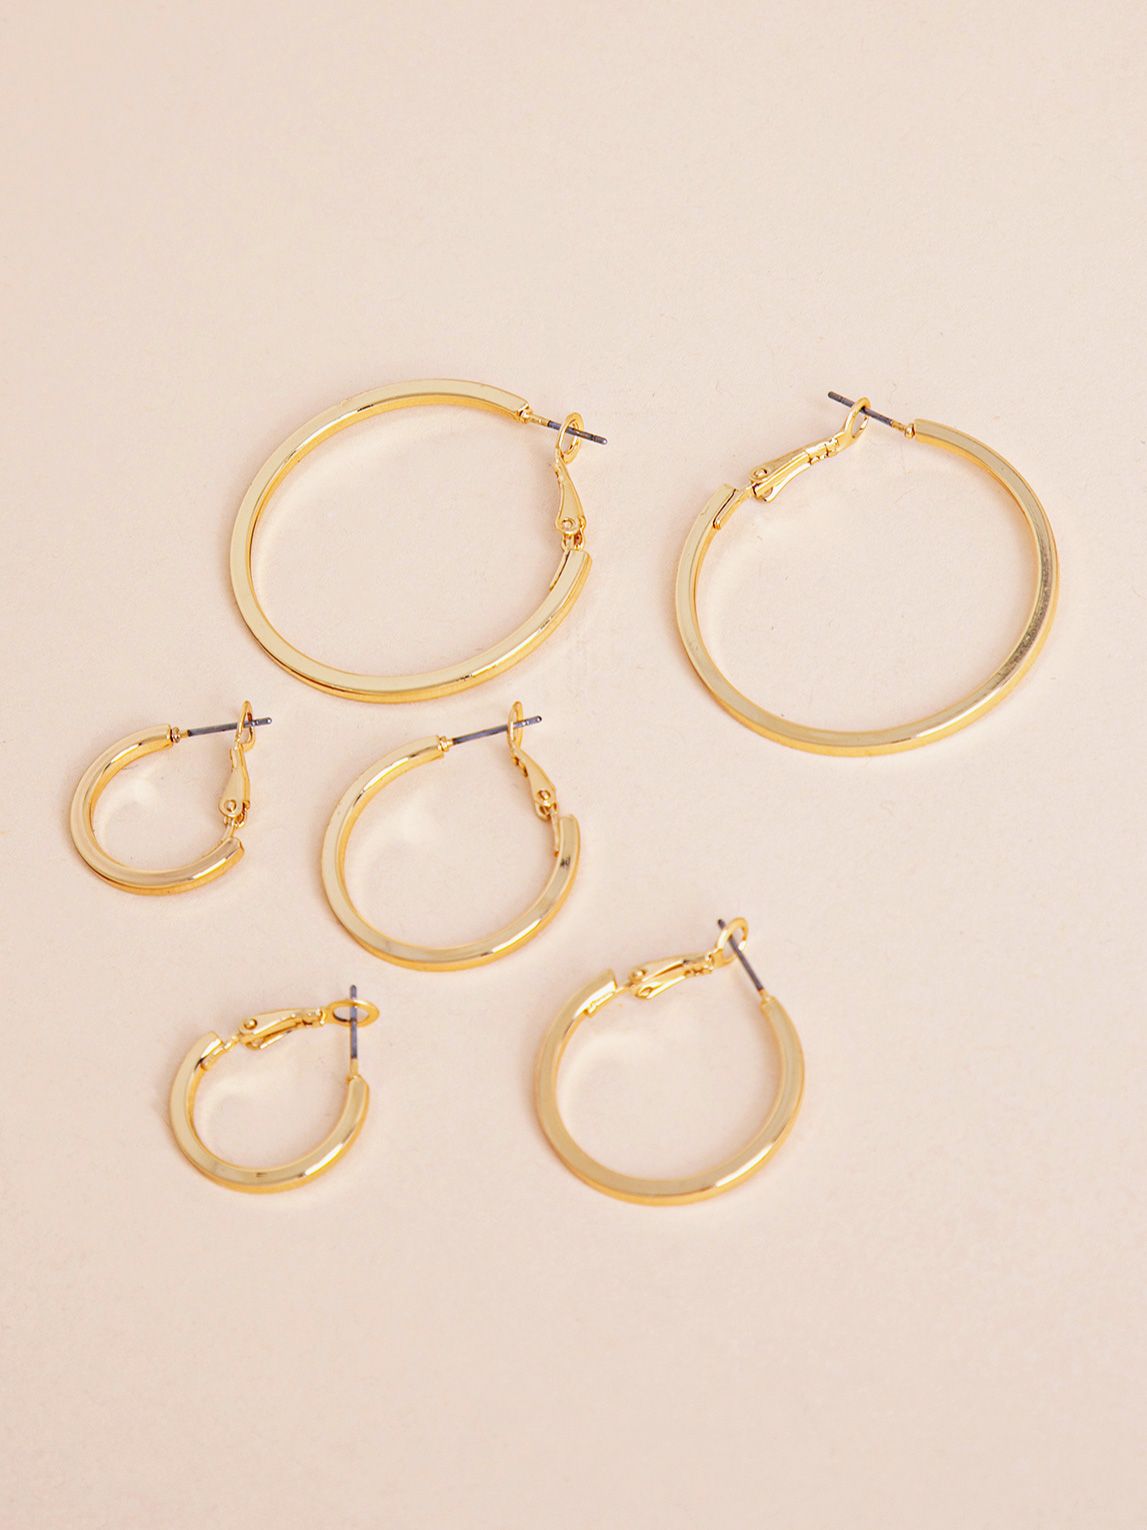 Trio Pack of Classic 14K Gold Hoops | Rickis | Ricki's